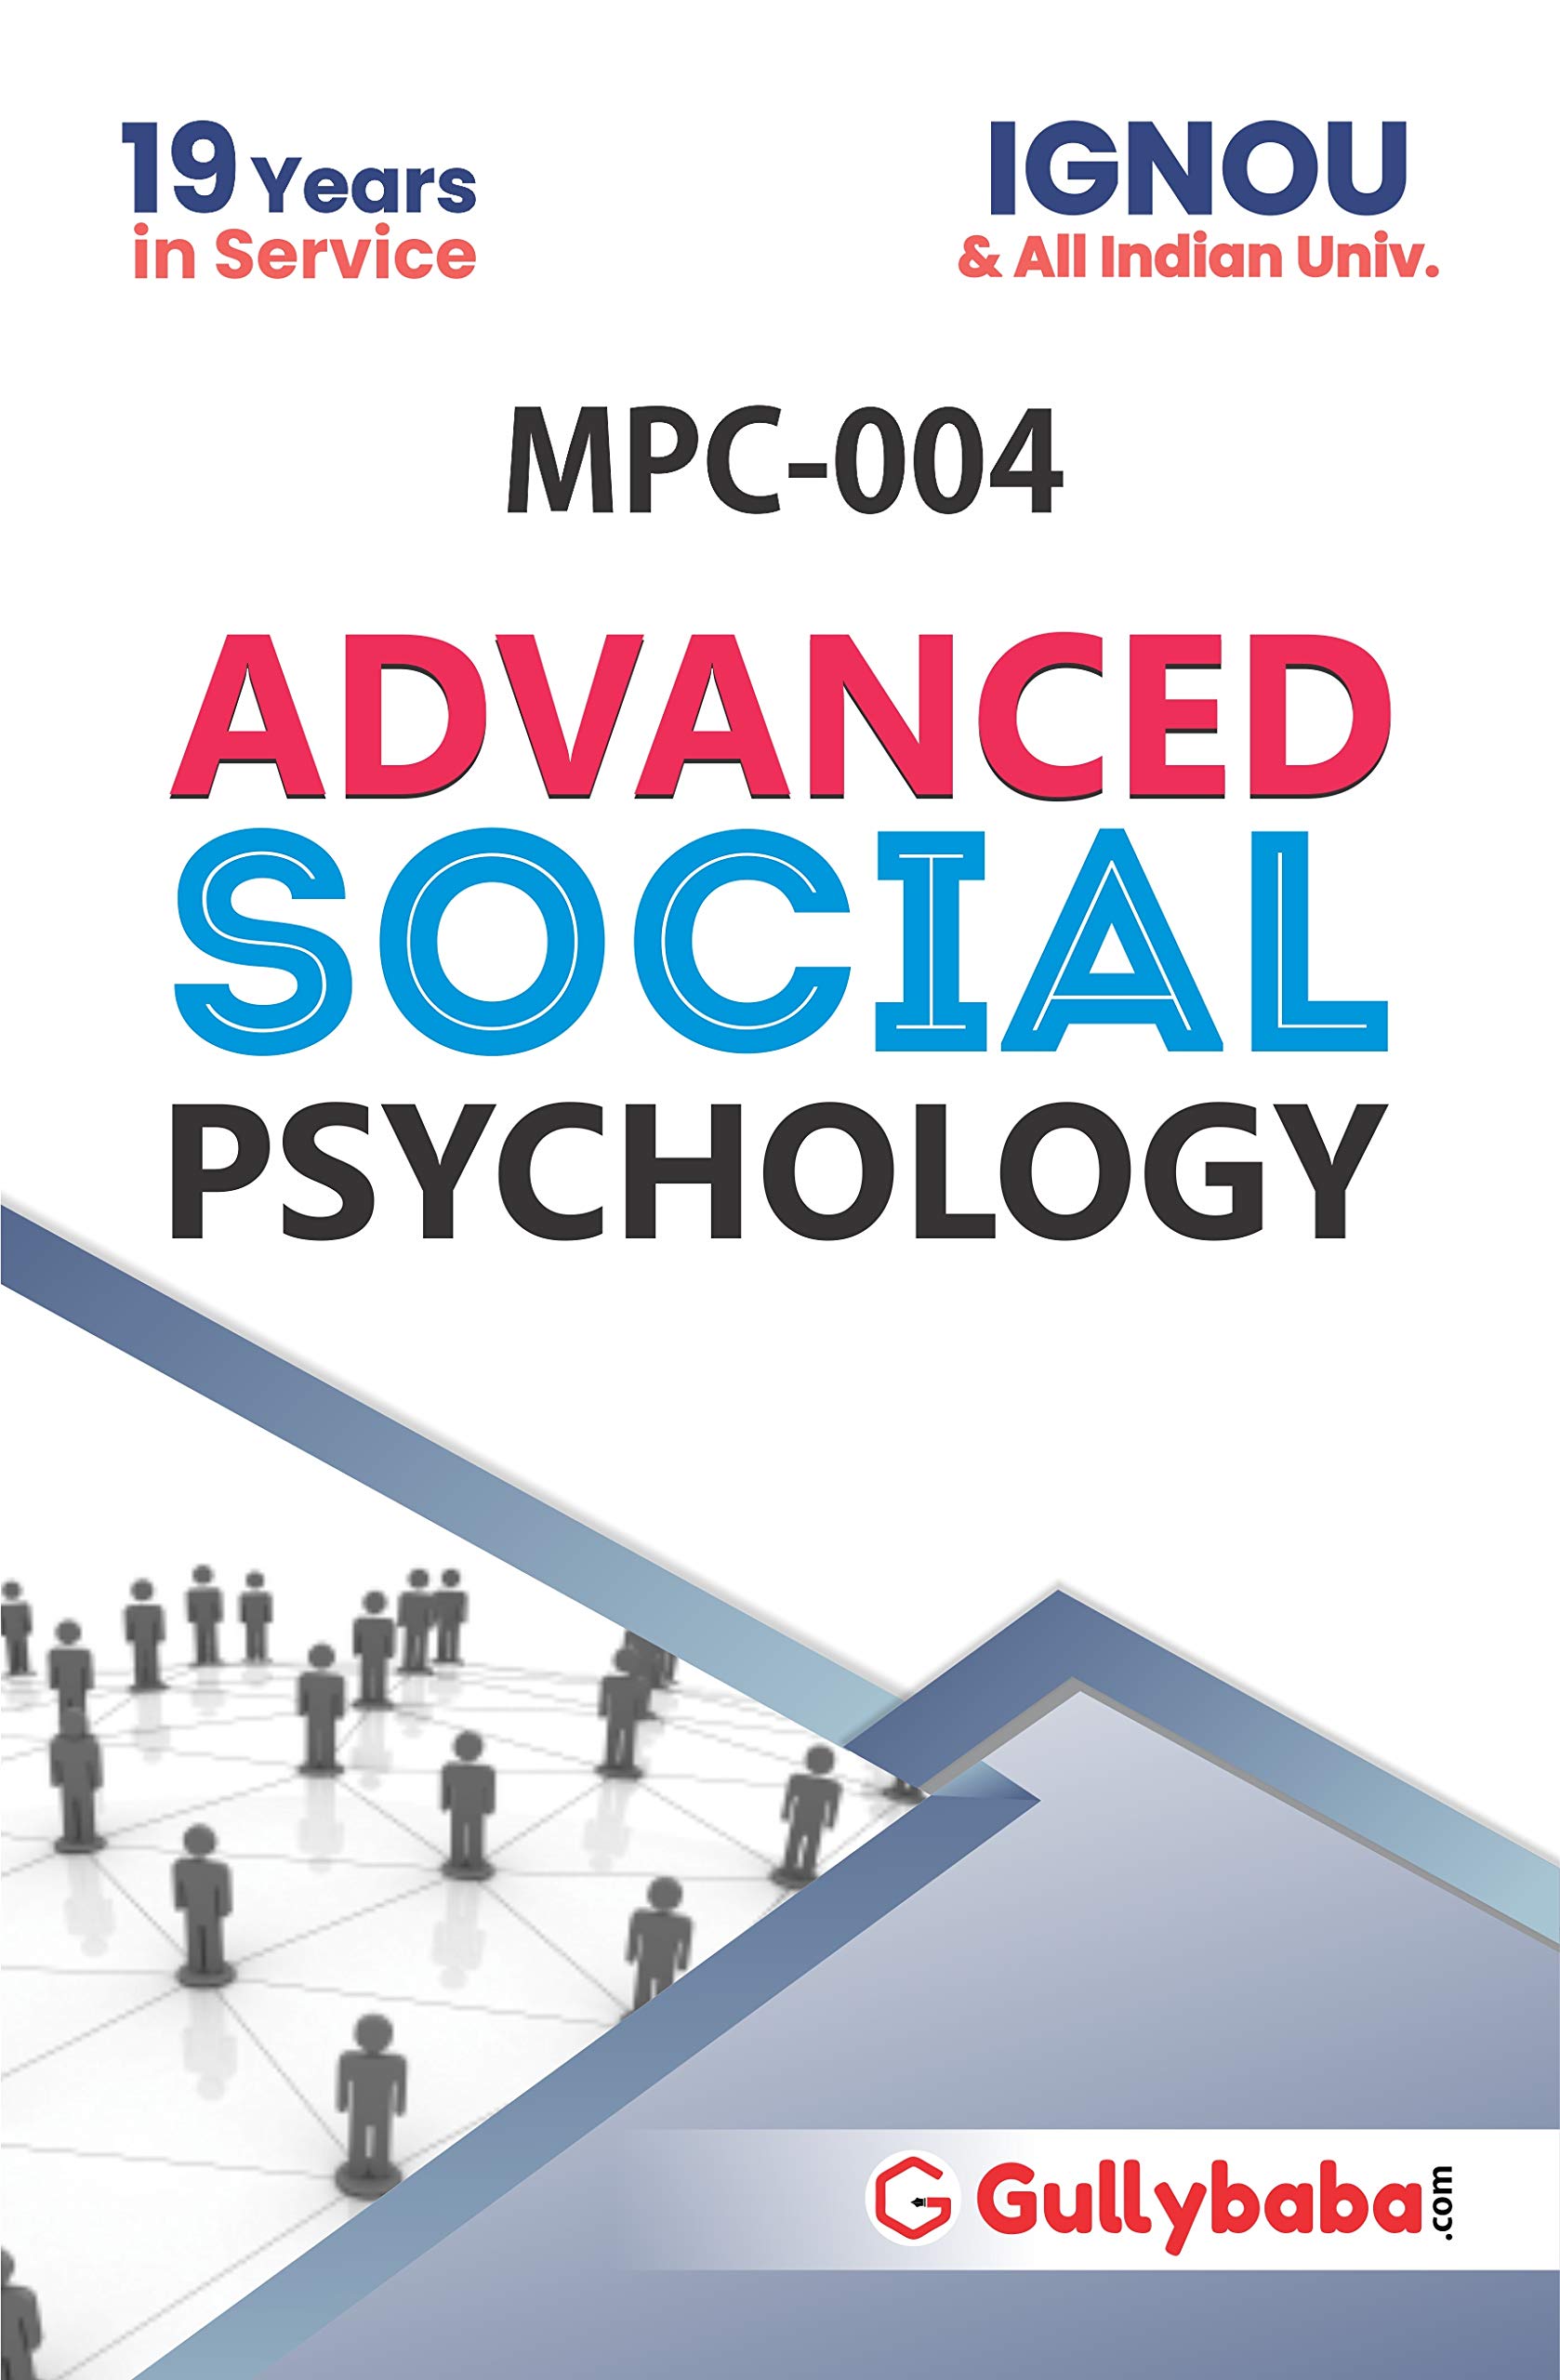 NEW Gullybaba IGNOU 1st Year MA (Latest Edition) MPC-004 Advanced Social Psychology IGNOU Help Book with Solved Previous Years’ Question Papers and Important Exam Notes [Paperback] Gullybaba.com Panel